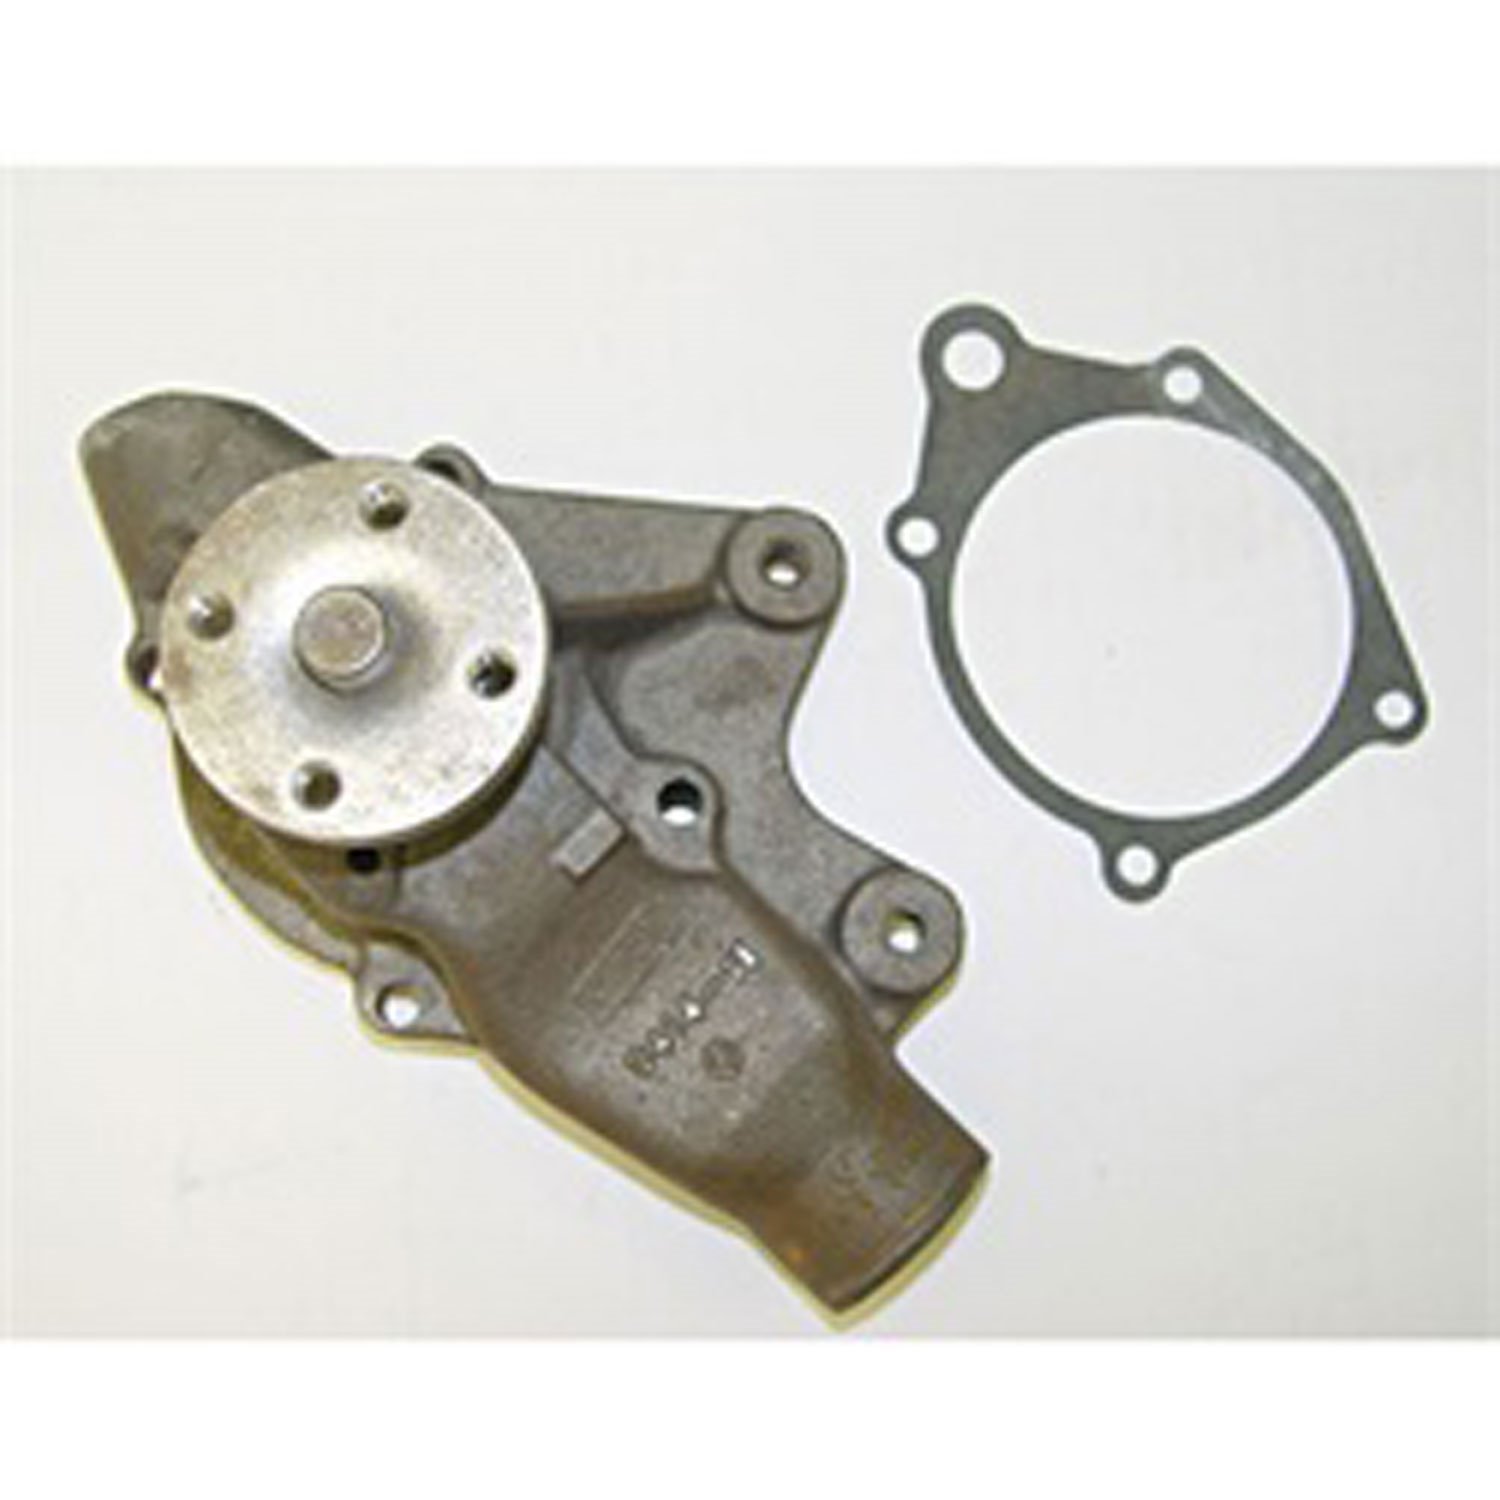 Replacement water pump from Omix-ADA, Fits 87-01 Jeep